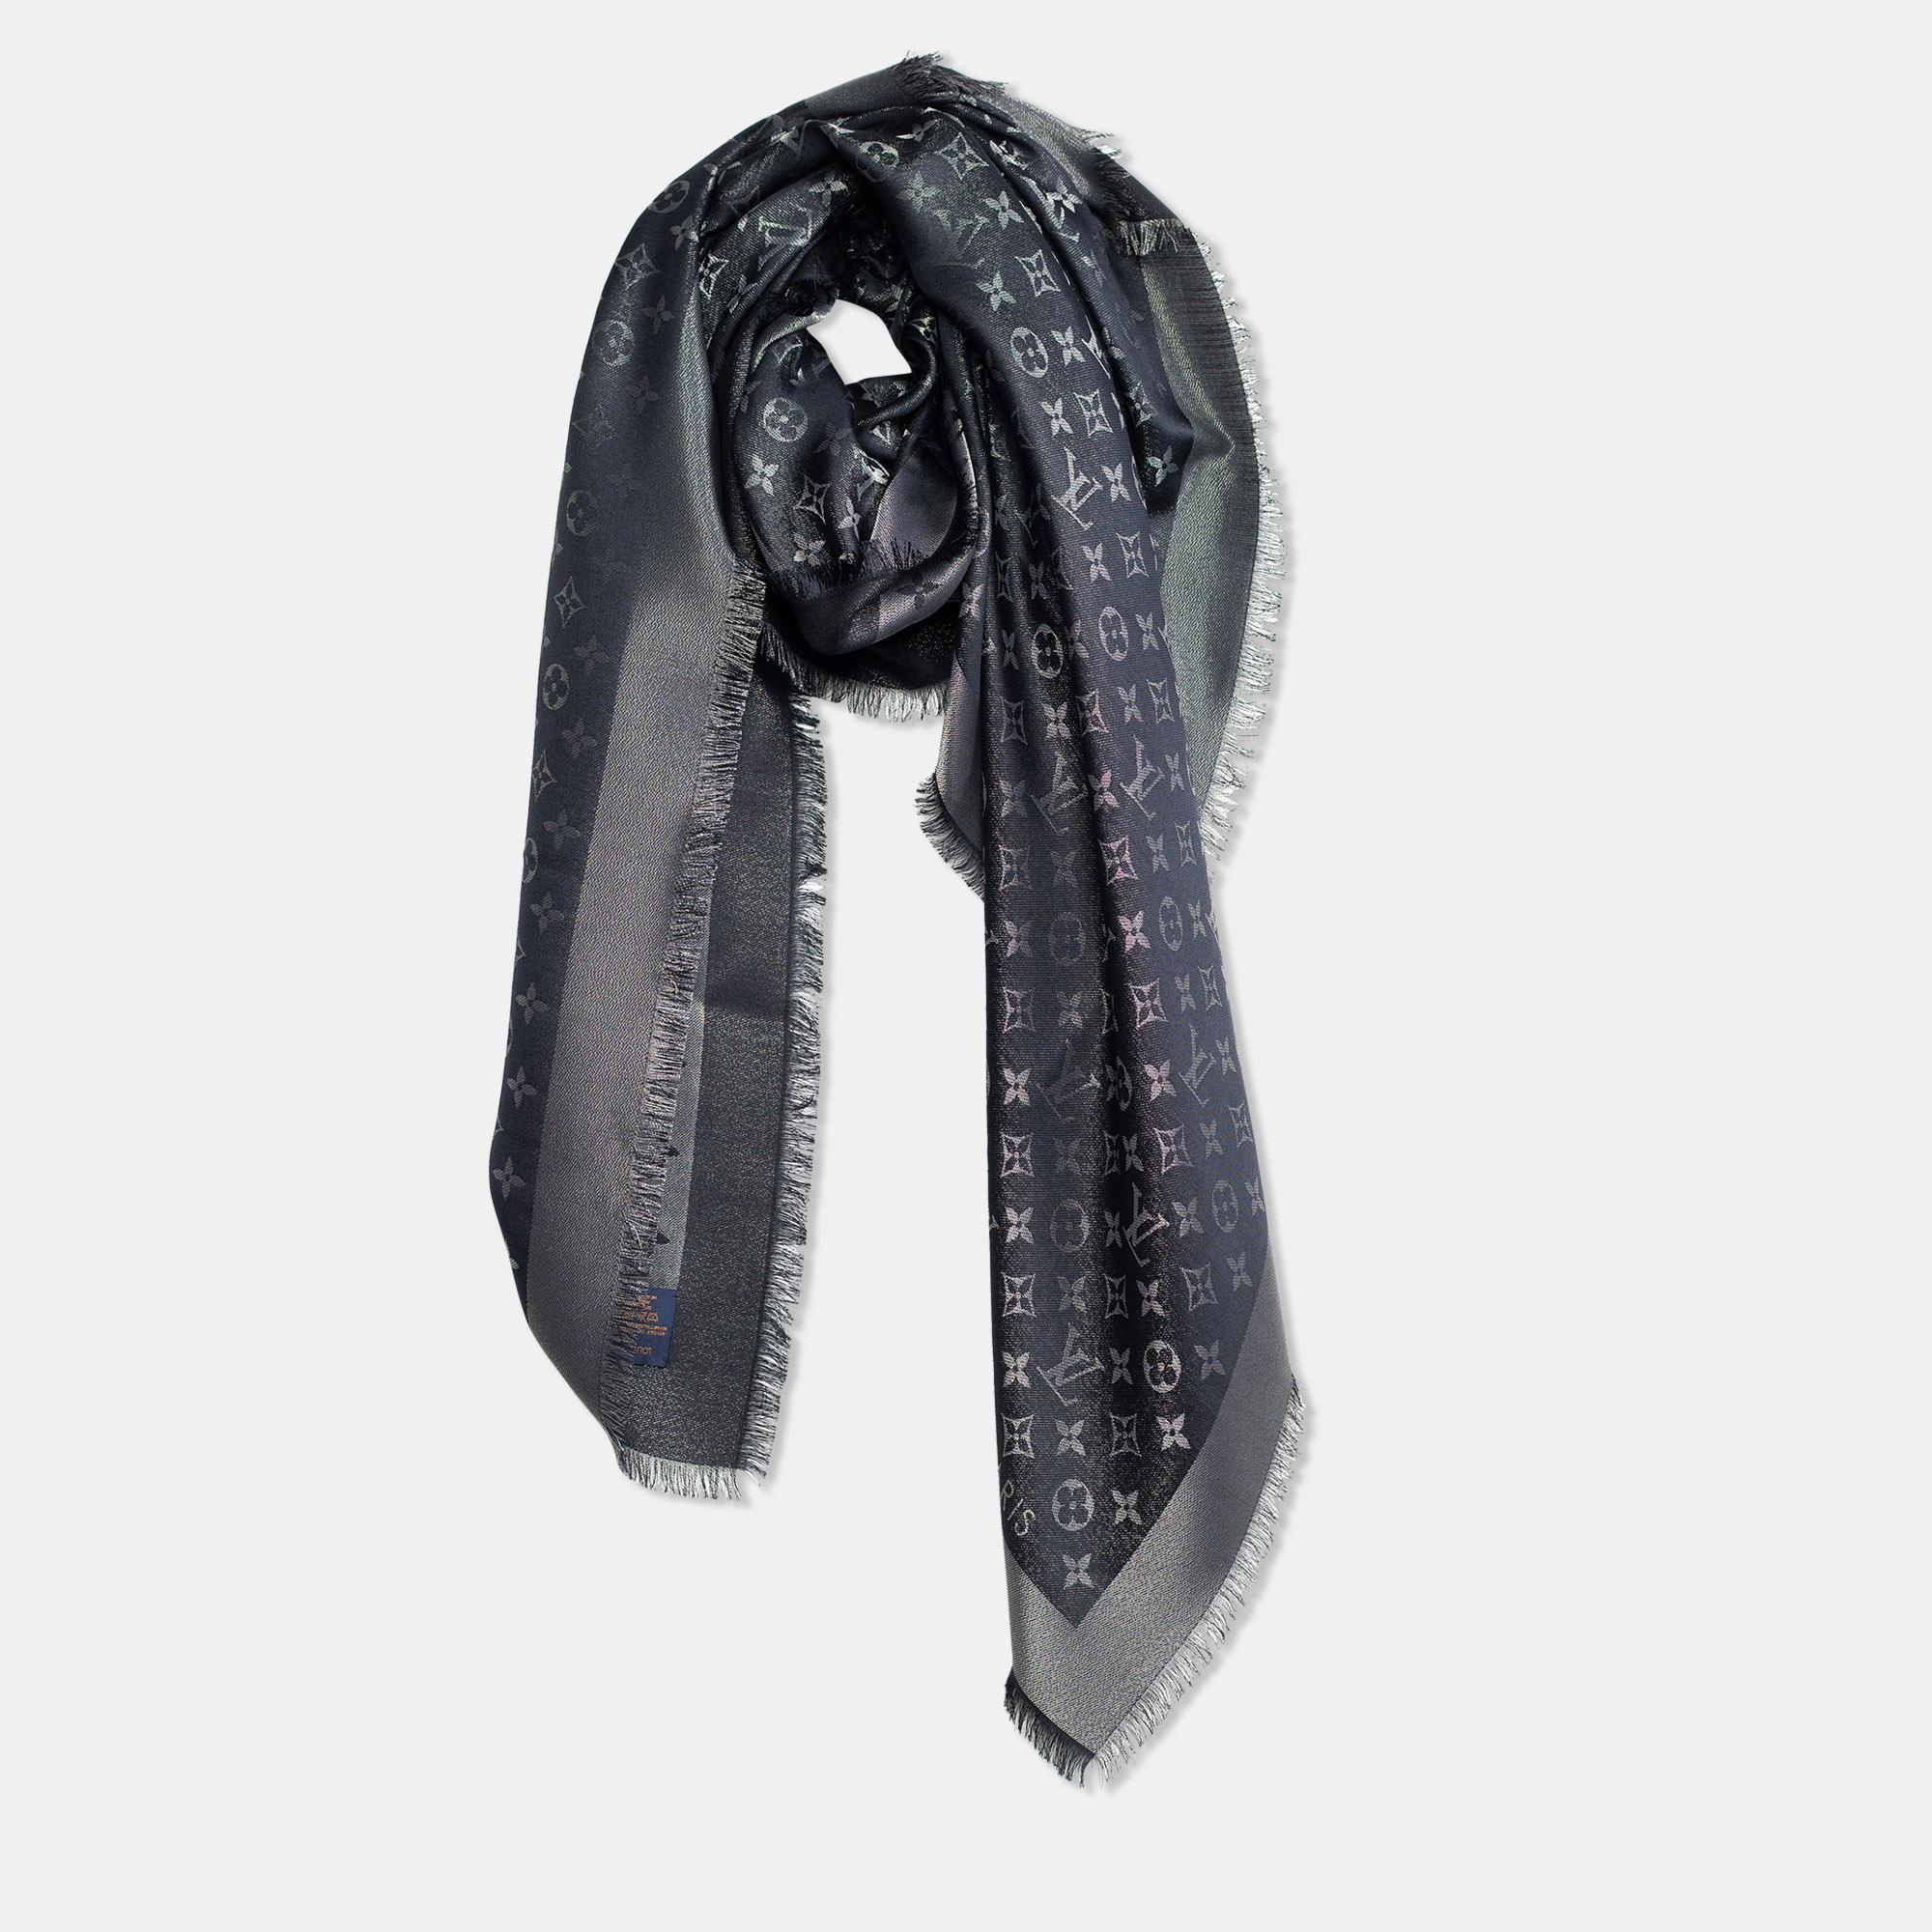 Louis Vuitton's famous monogram comes alive in this beauty of a shawl. Made from quality fabrics and designed in a classy black shade with frayed trims on the edges, the shawl has the perfect length to style around your shoulder or around your